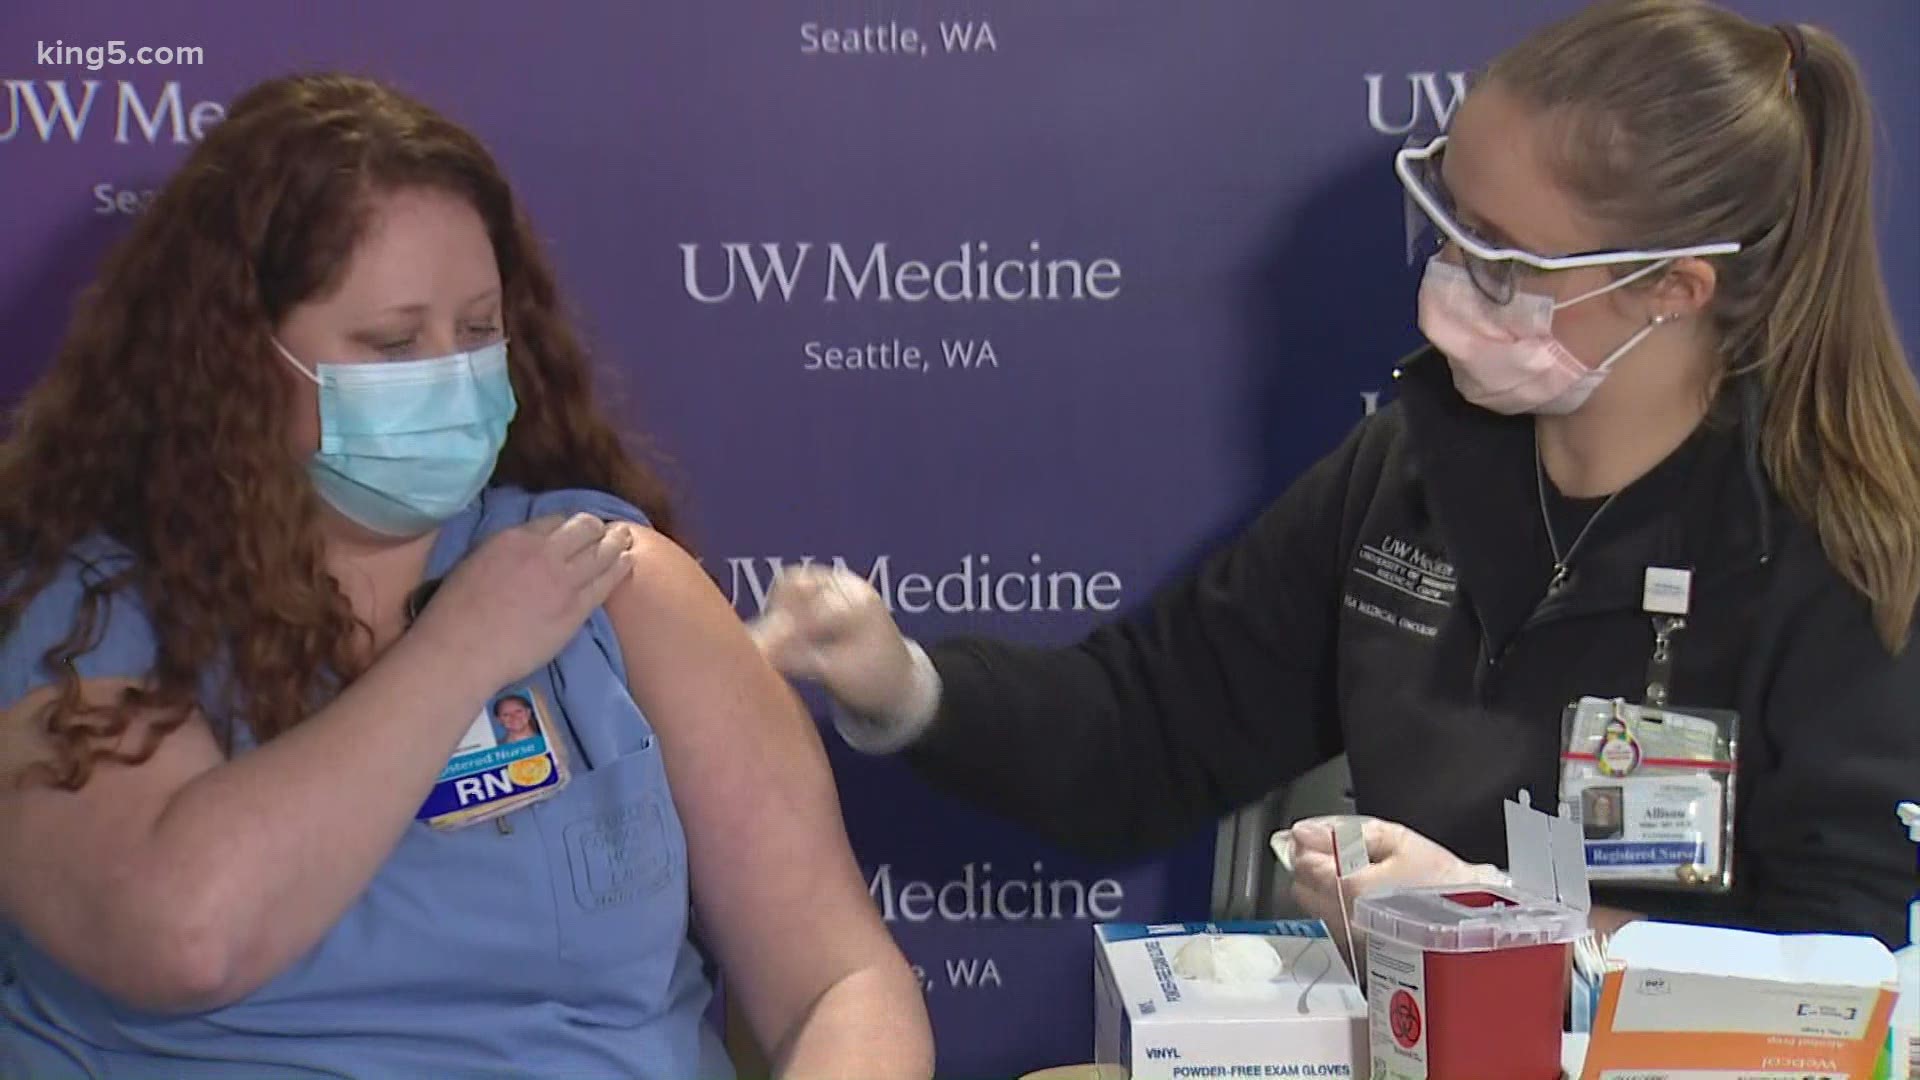 Frontline medical workers at UW Medicine will be the first people in western Washington to receive the Pfizer COVID-19 vaccine.